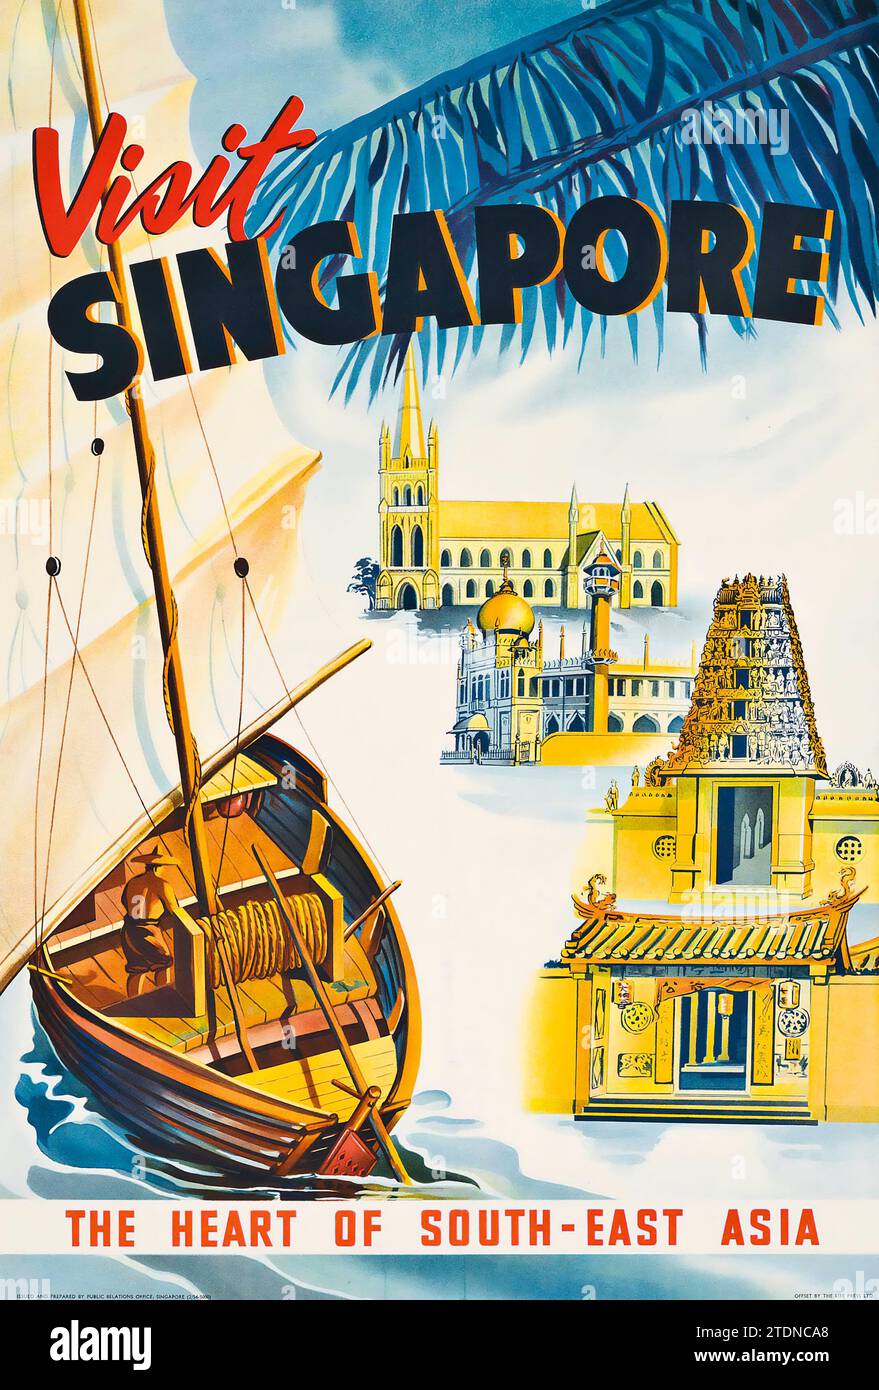 VISIT SINGAPORE - The Heart of South-east Asia - vintage travel poster, 1954 Stock Photo